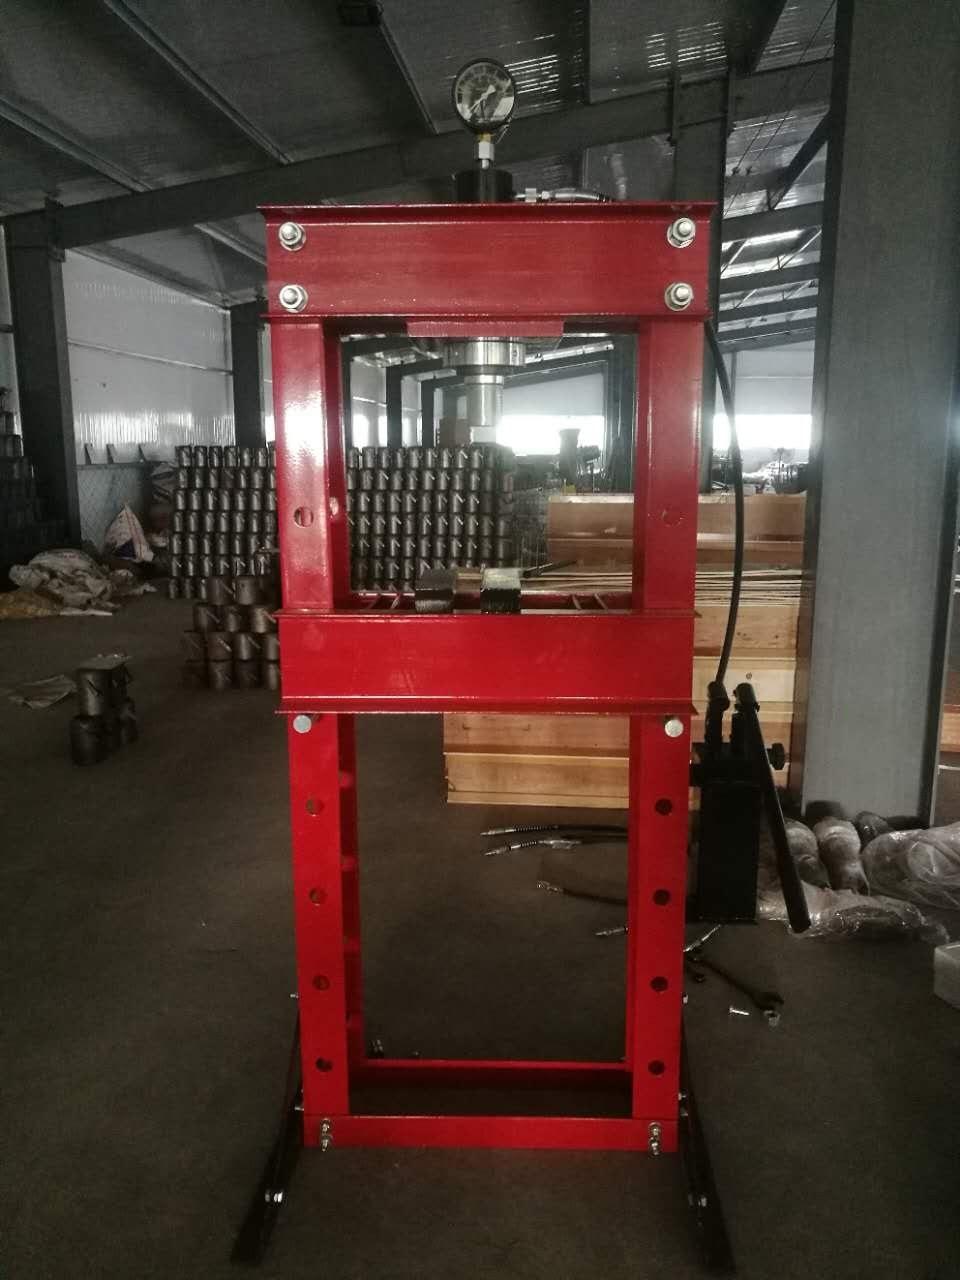 10t Hydraulic Shop Press with Safety Guard